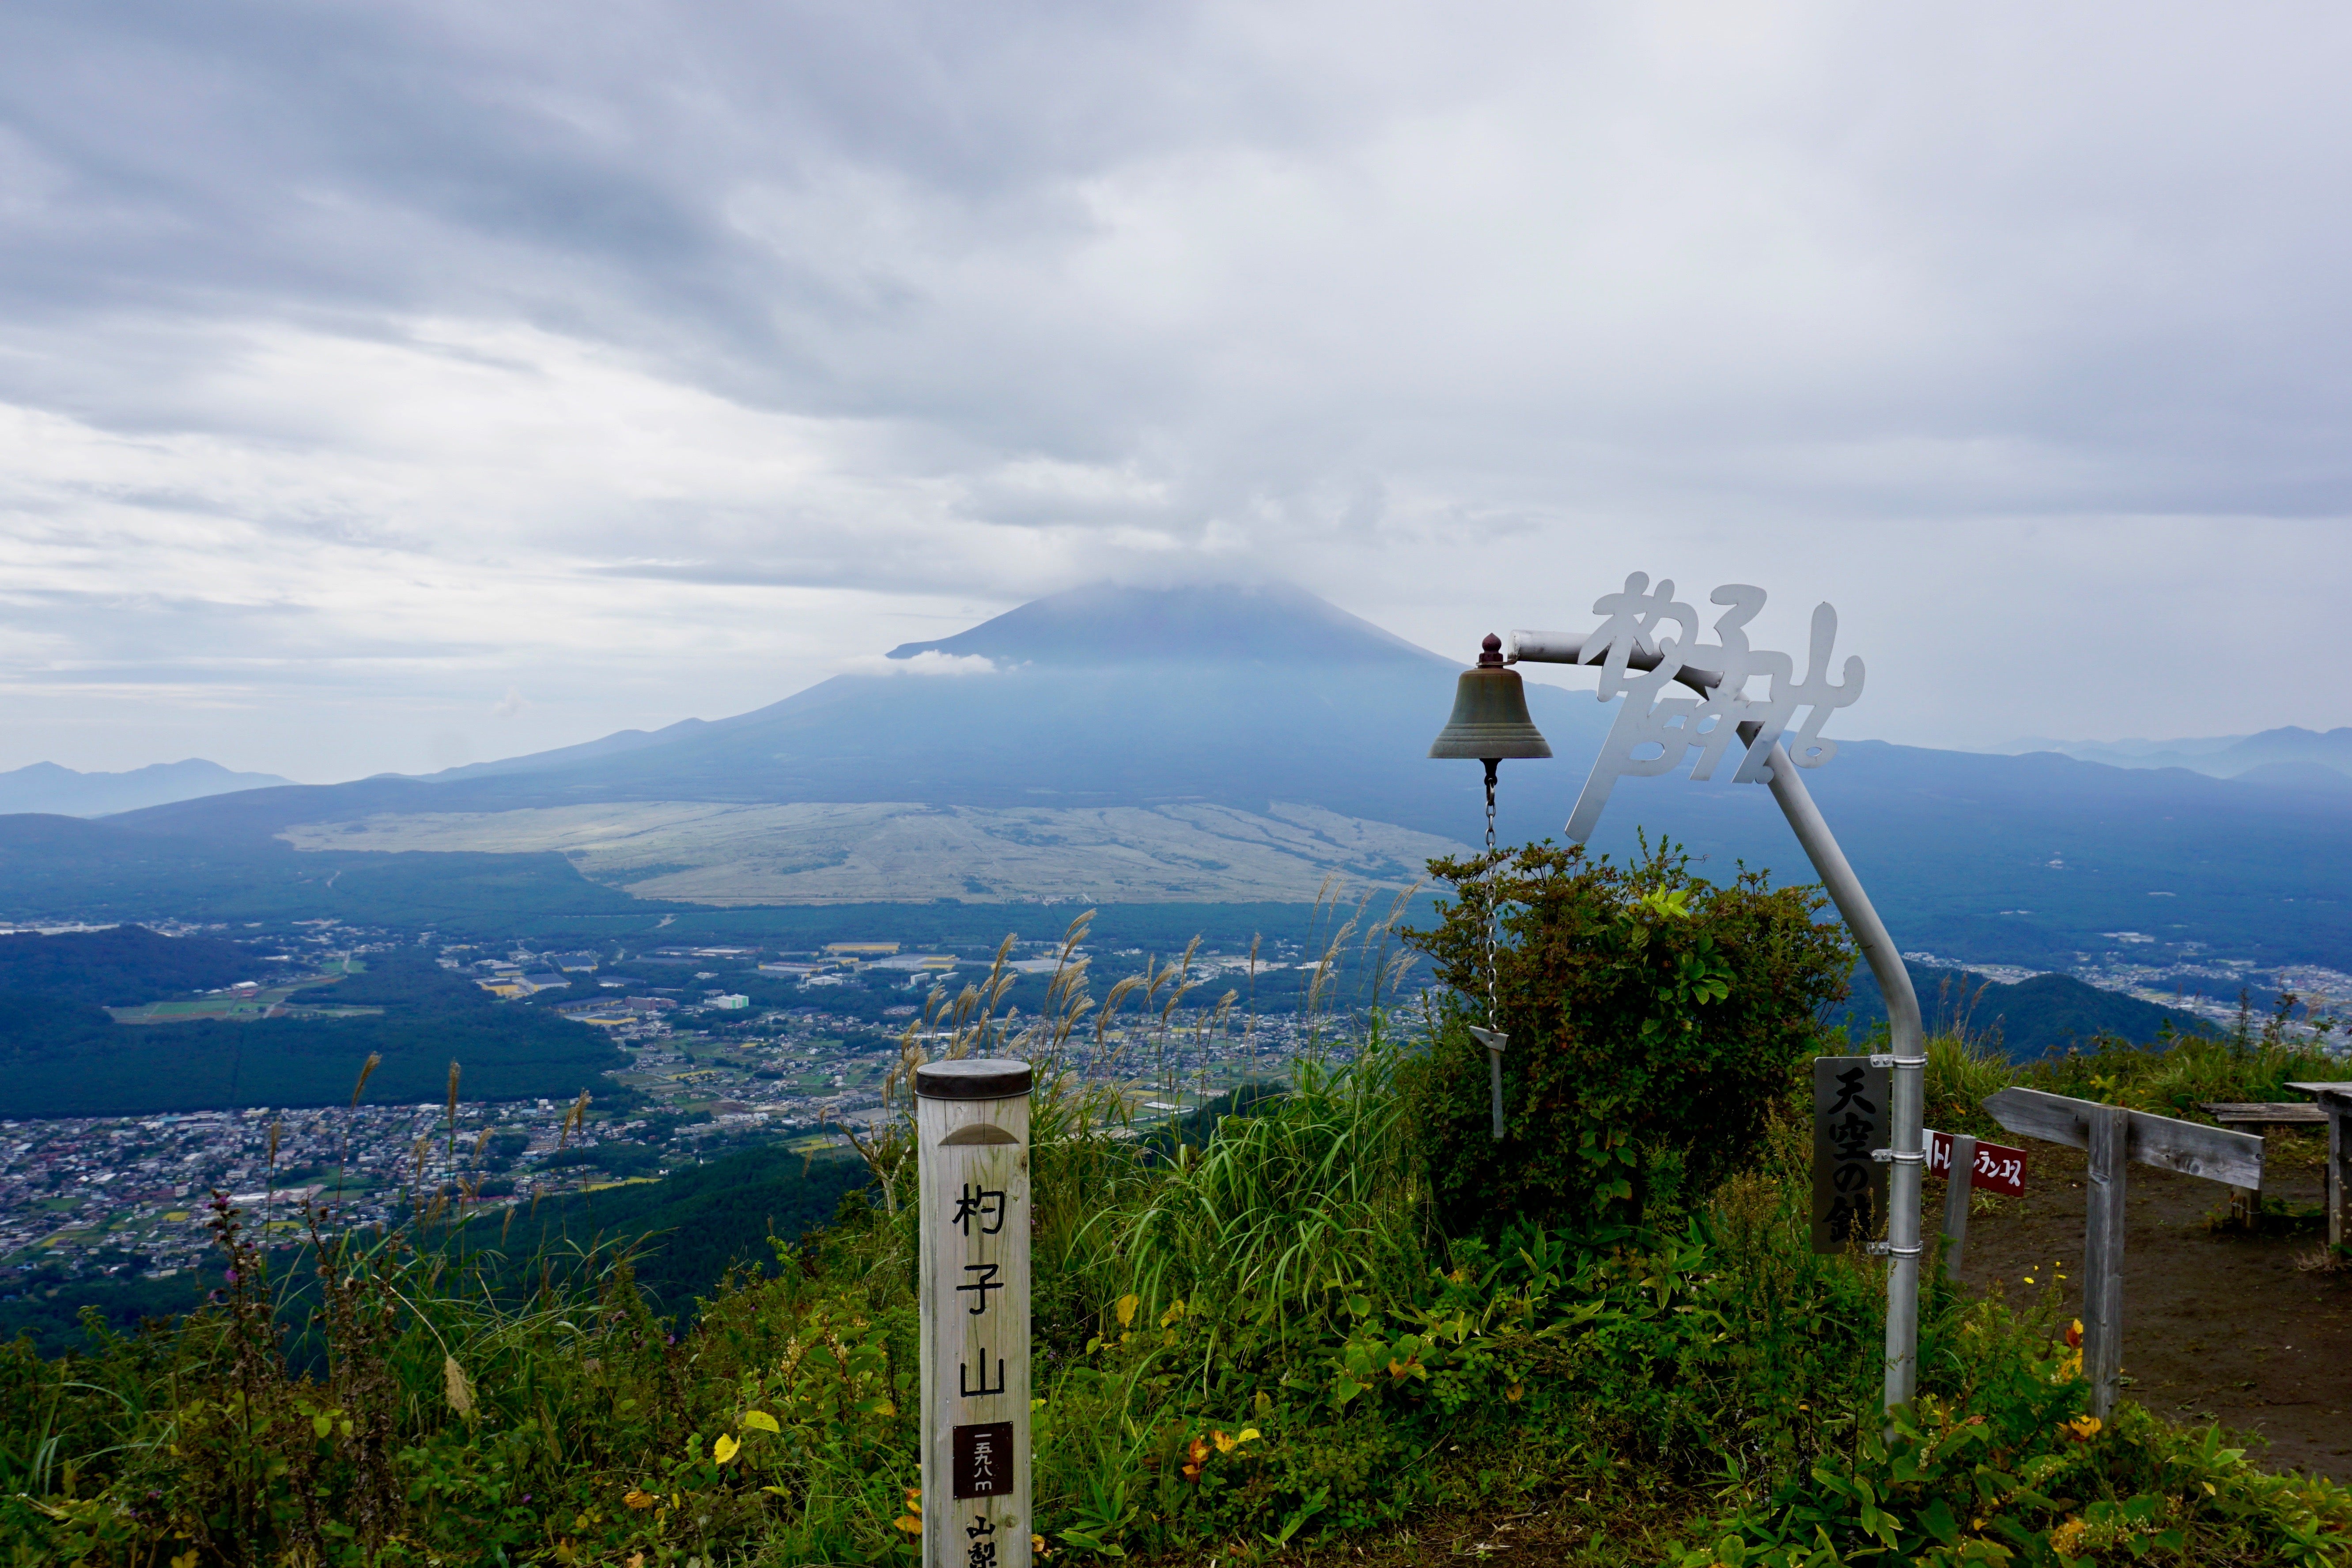 A mountain and the city below it in Japan, seen from high ground